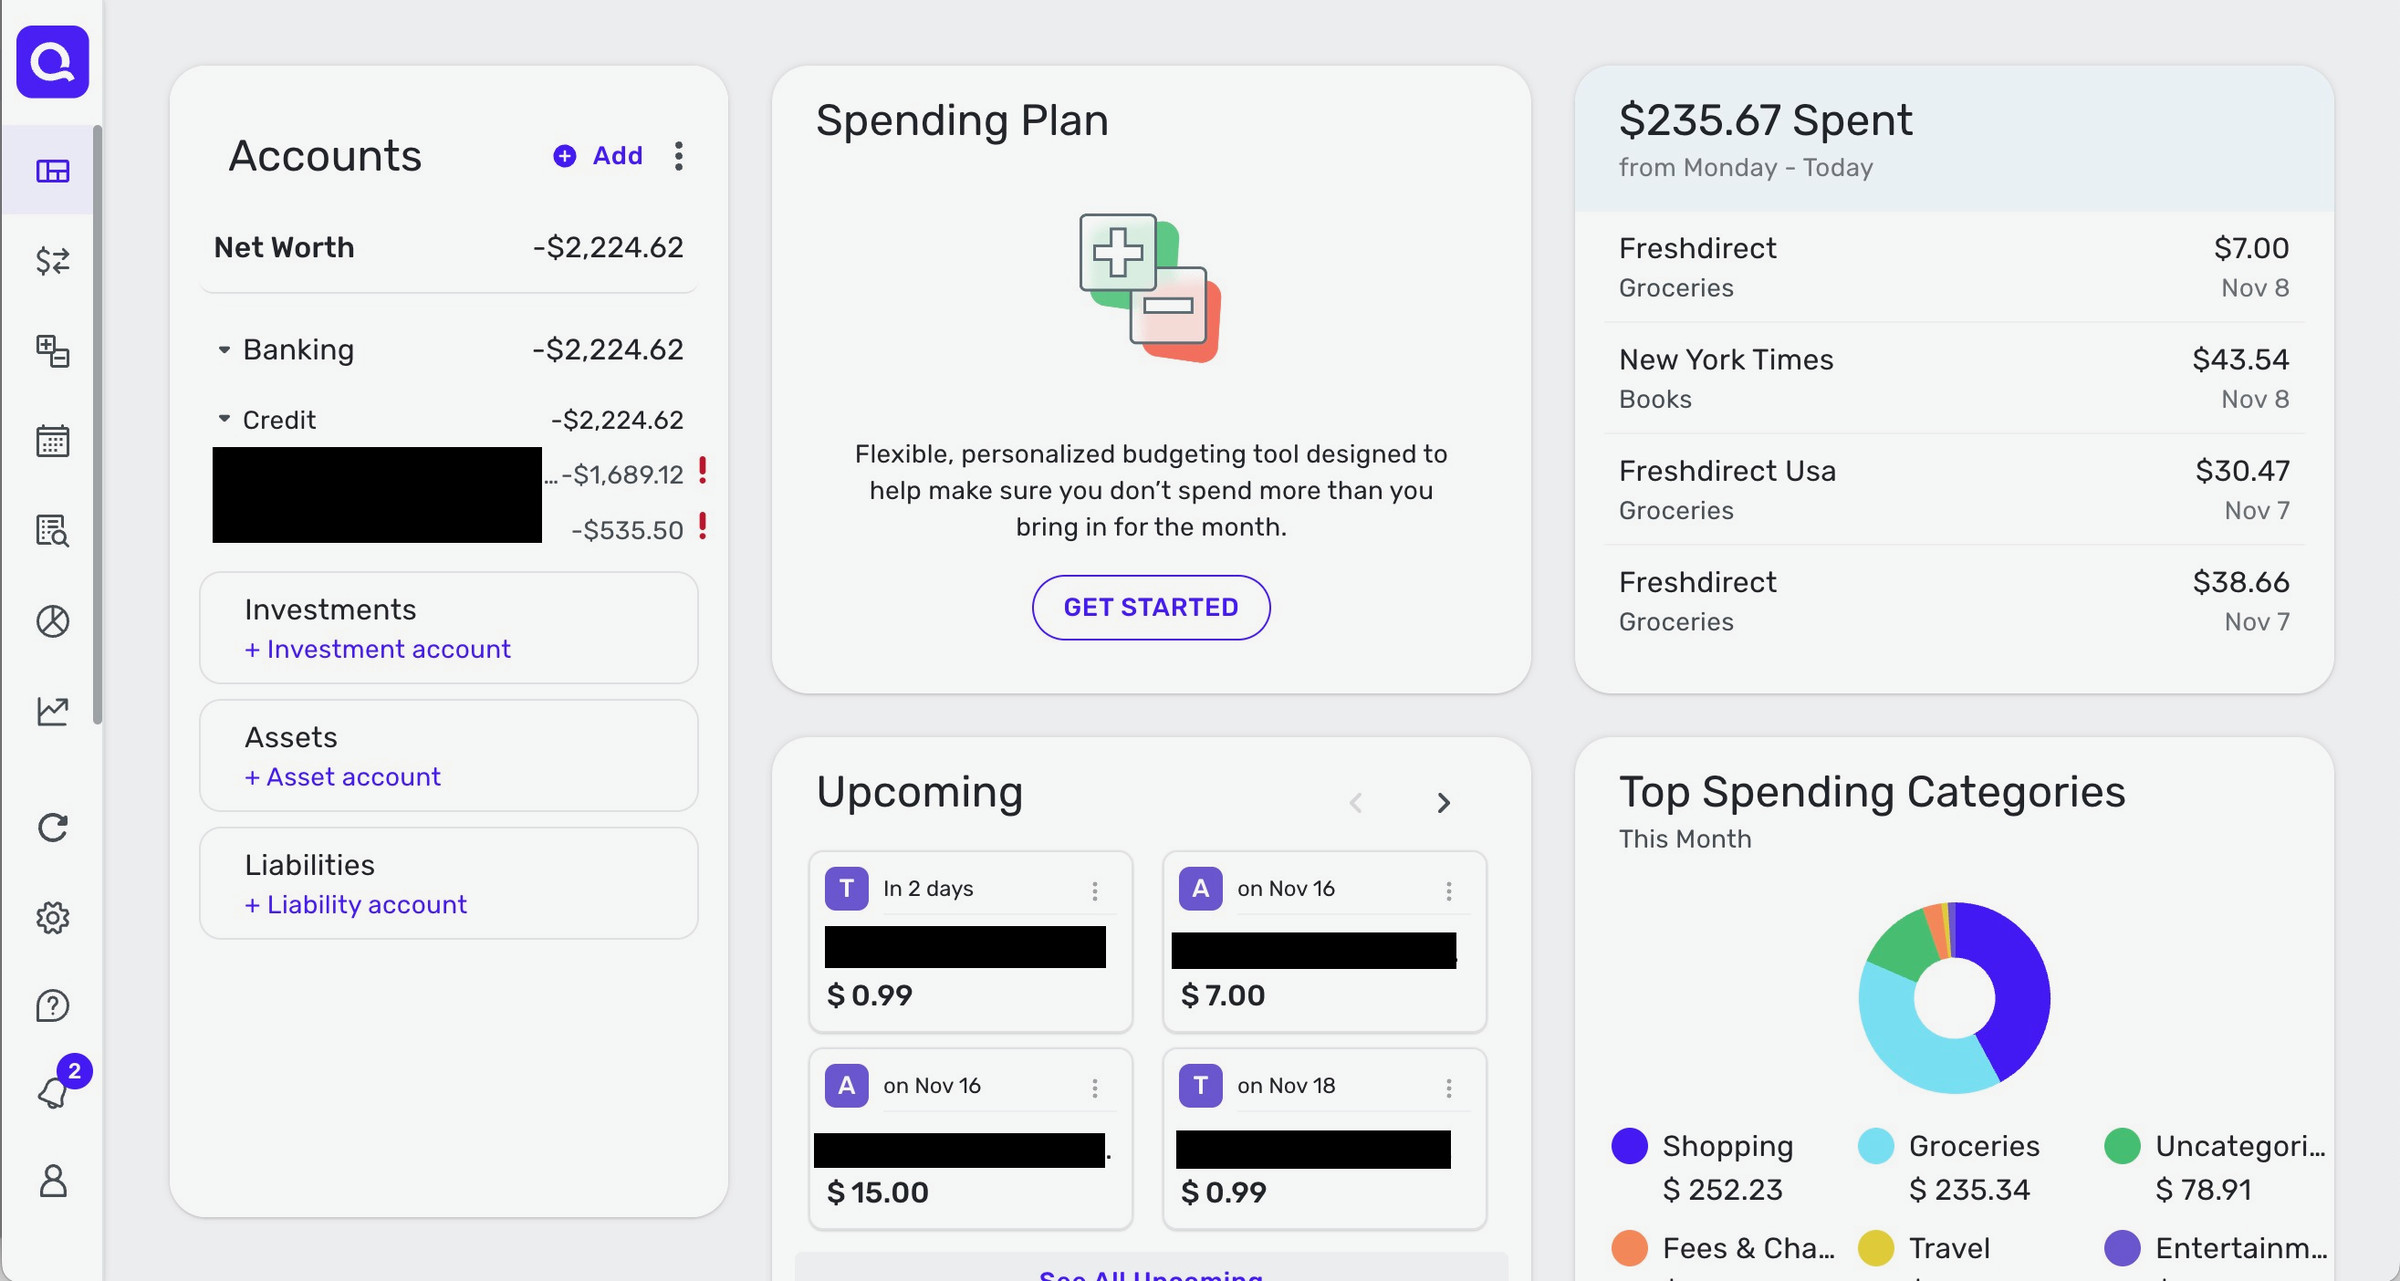 Quicken Simplifi dashboard showing accounts, a spending plan, upcoming expenses, $235.67 spent, and top spending categories.